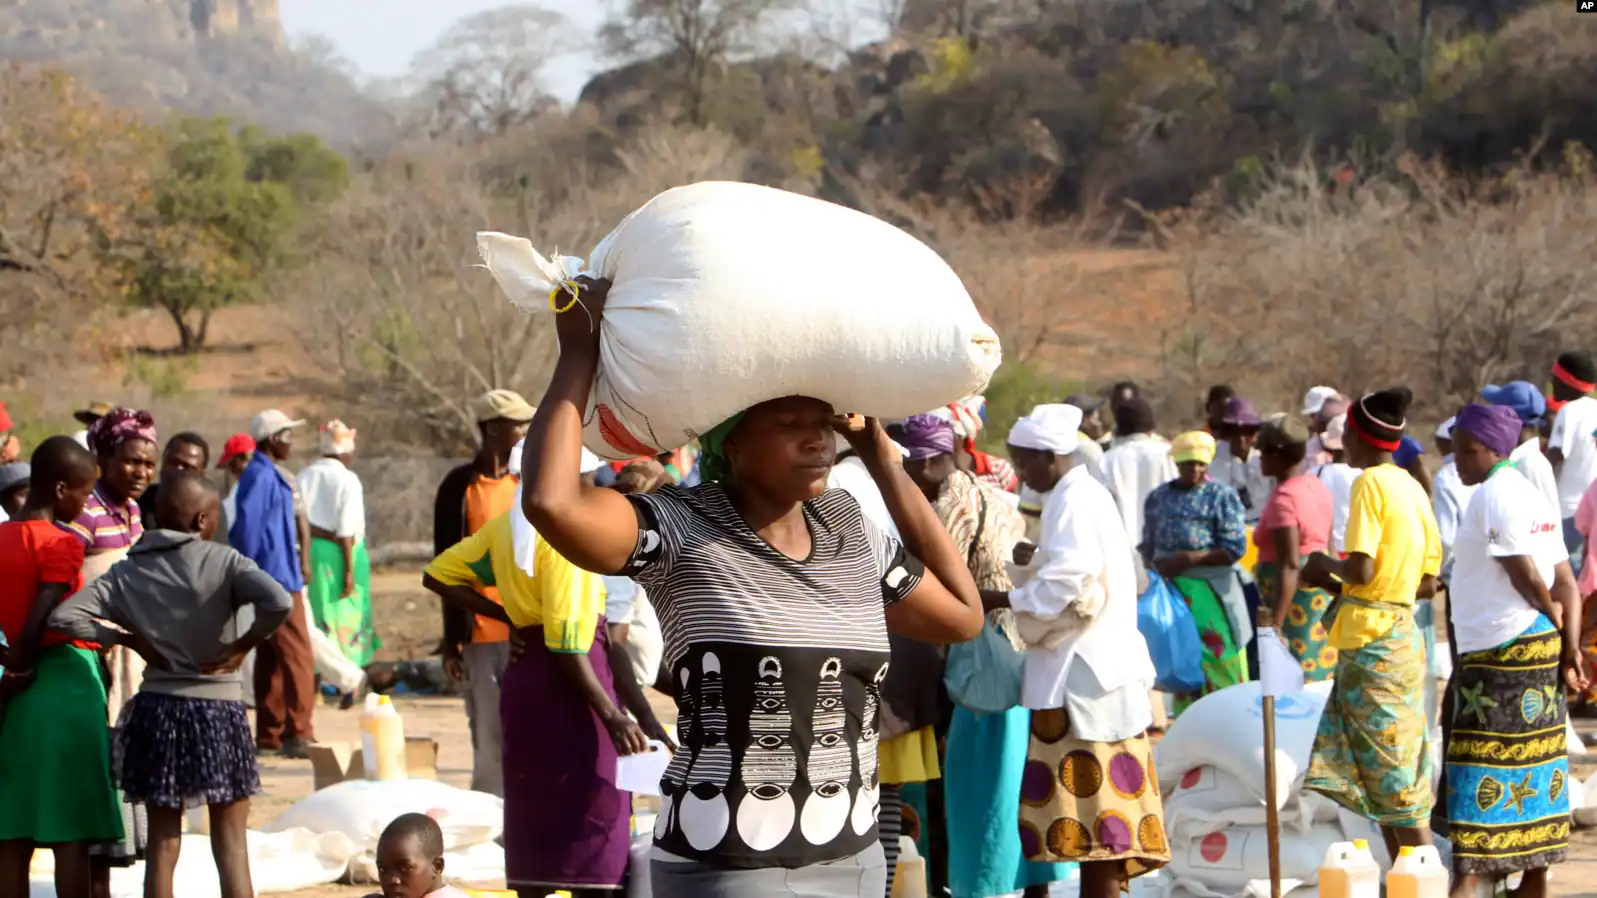 Zanu PF party was denying food handouts to opposition party supporters | Report Focus News